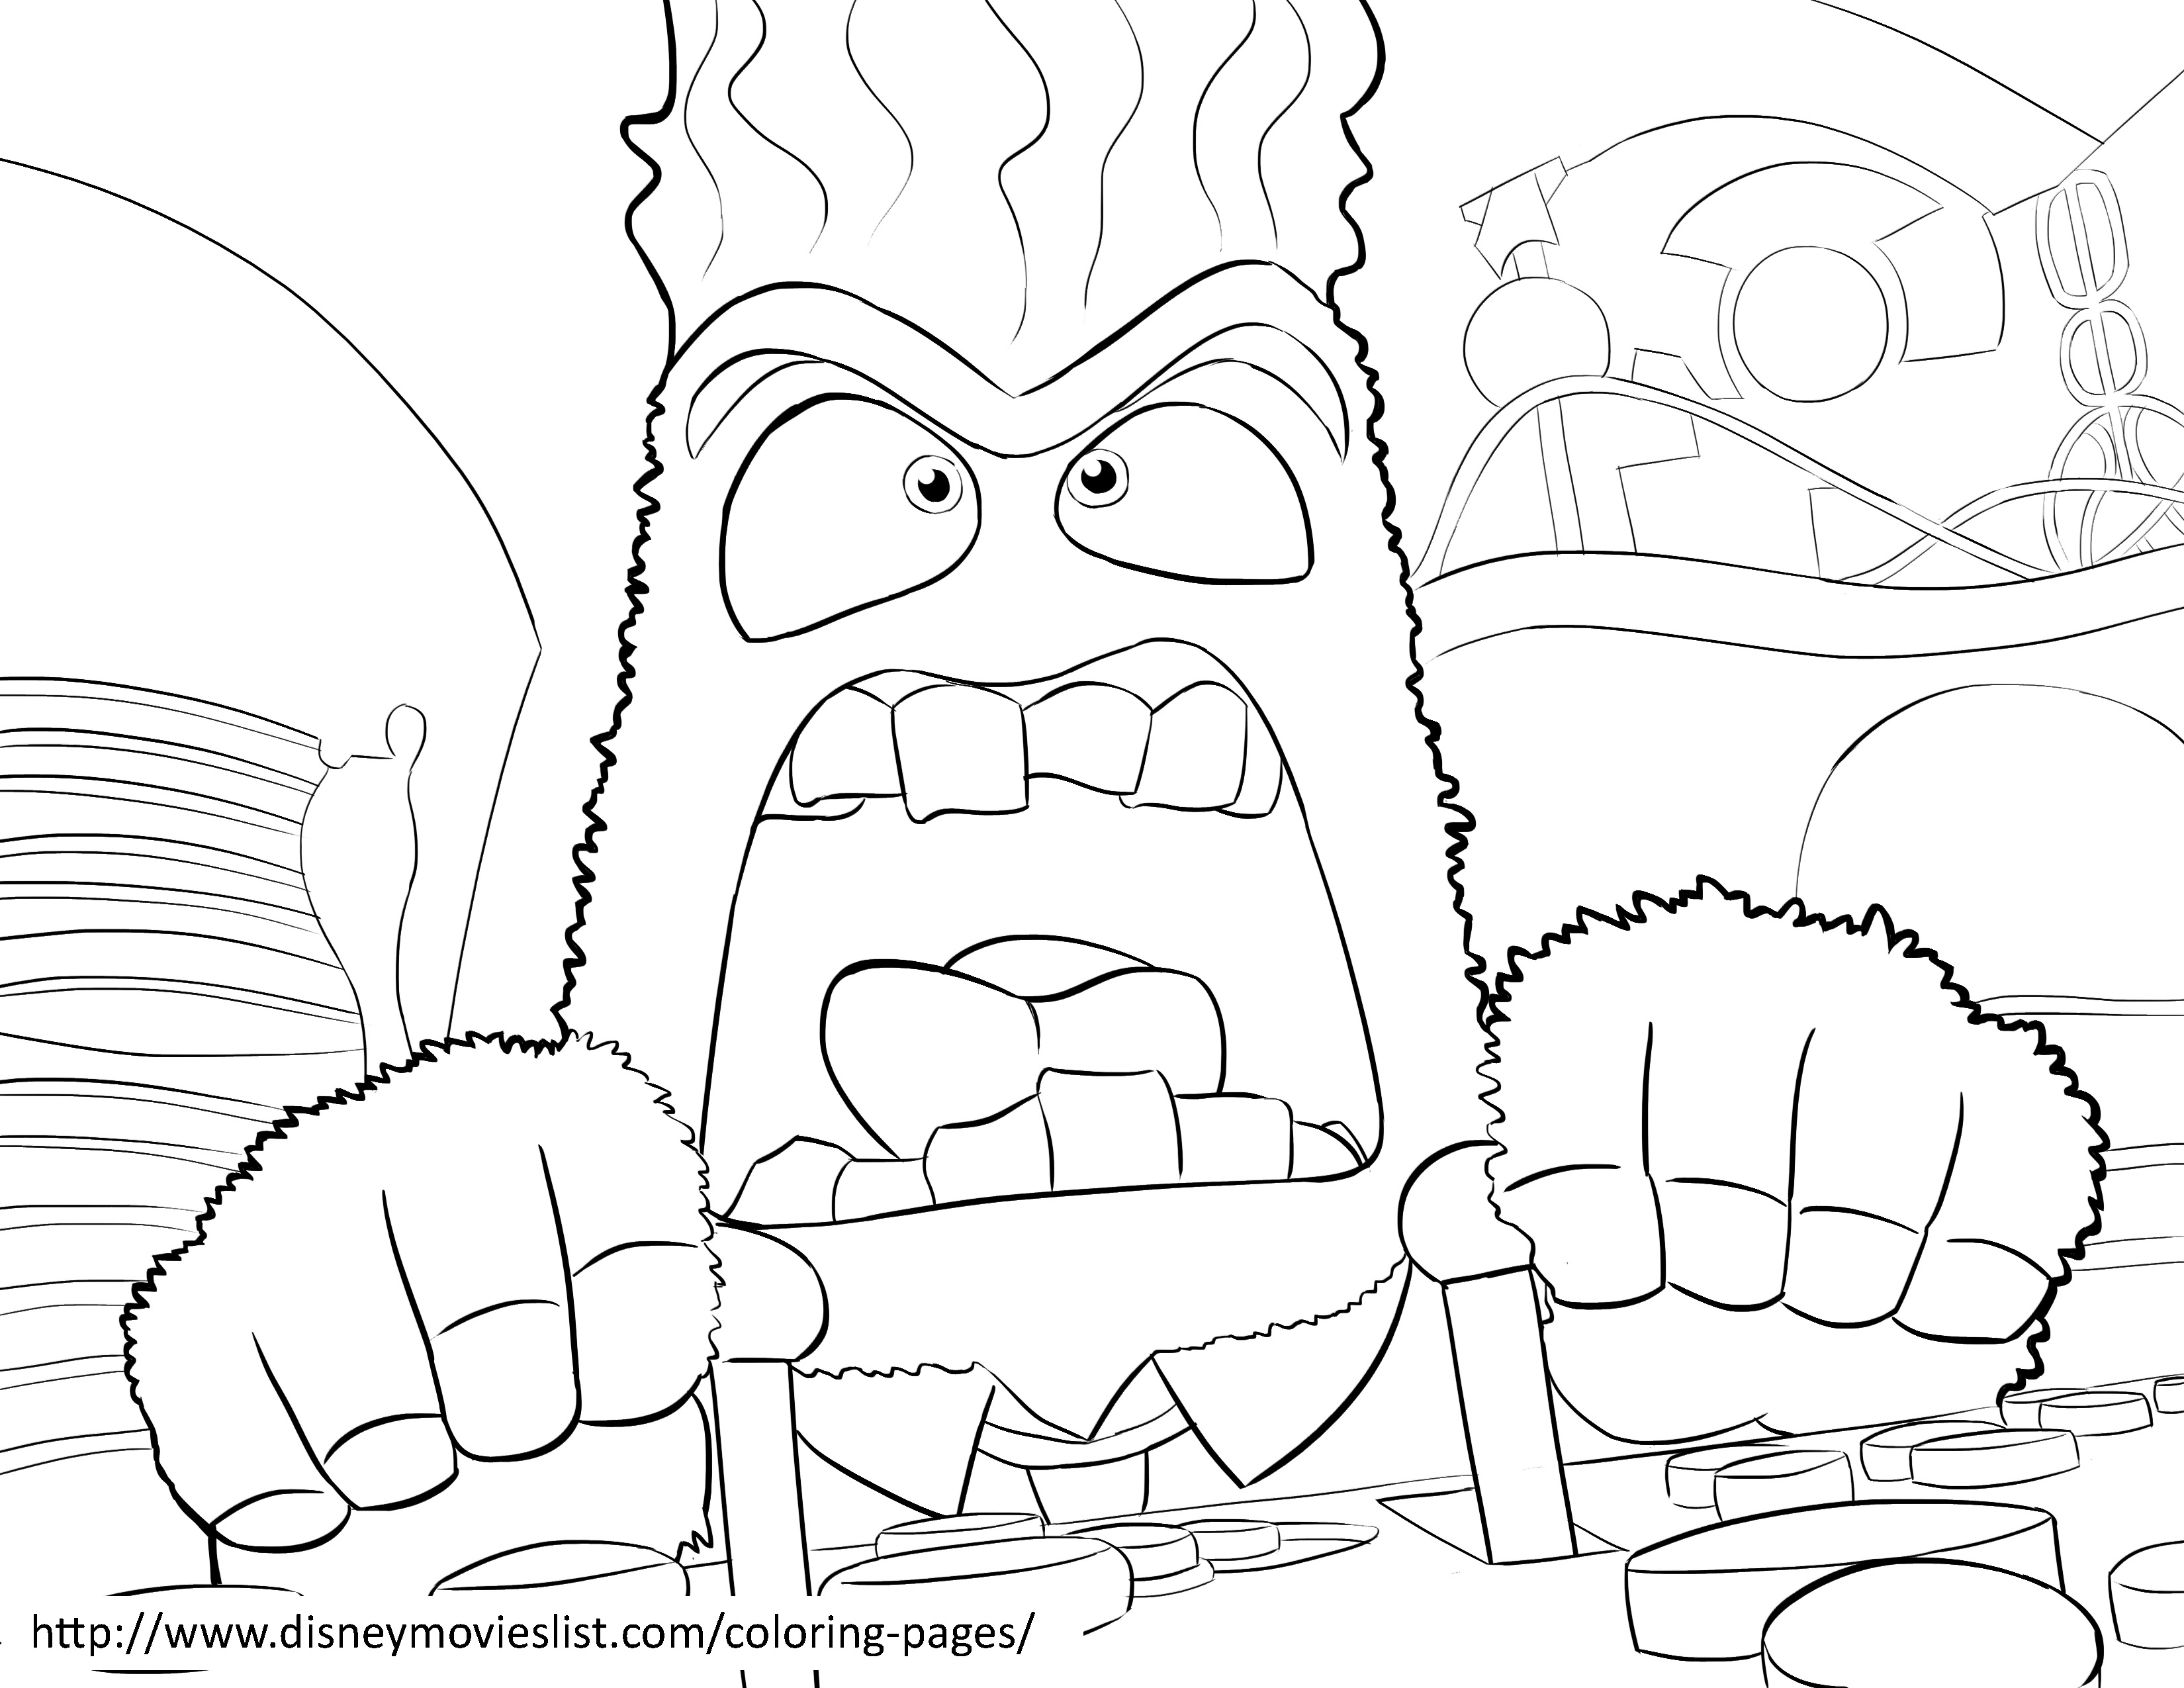 Anger coloring #8, Download drawings